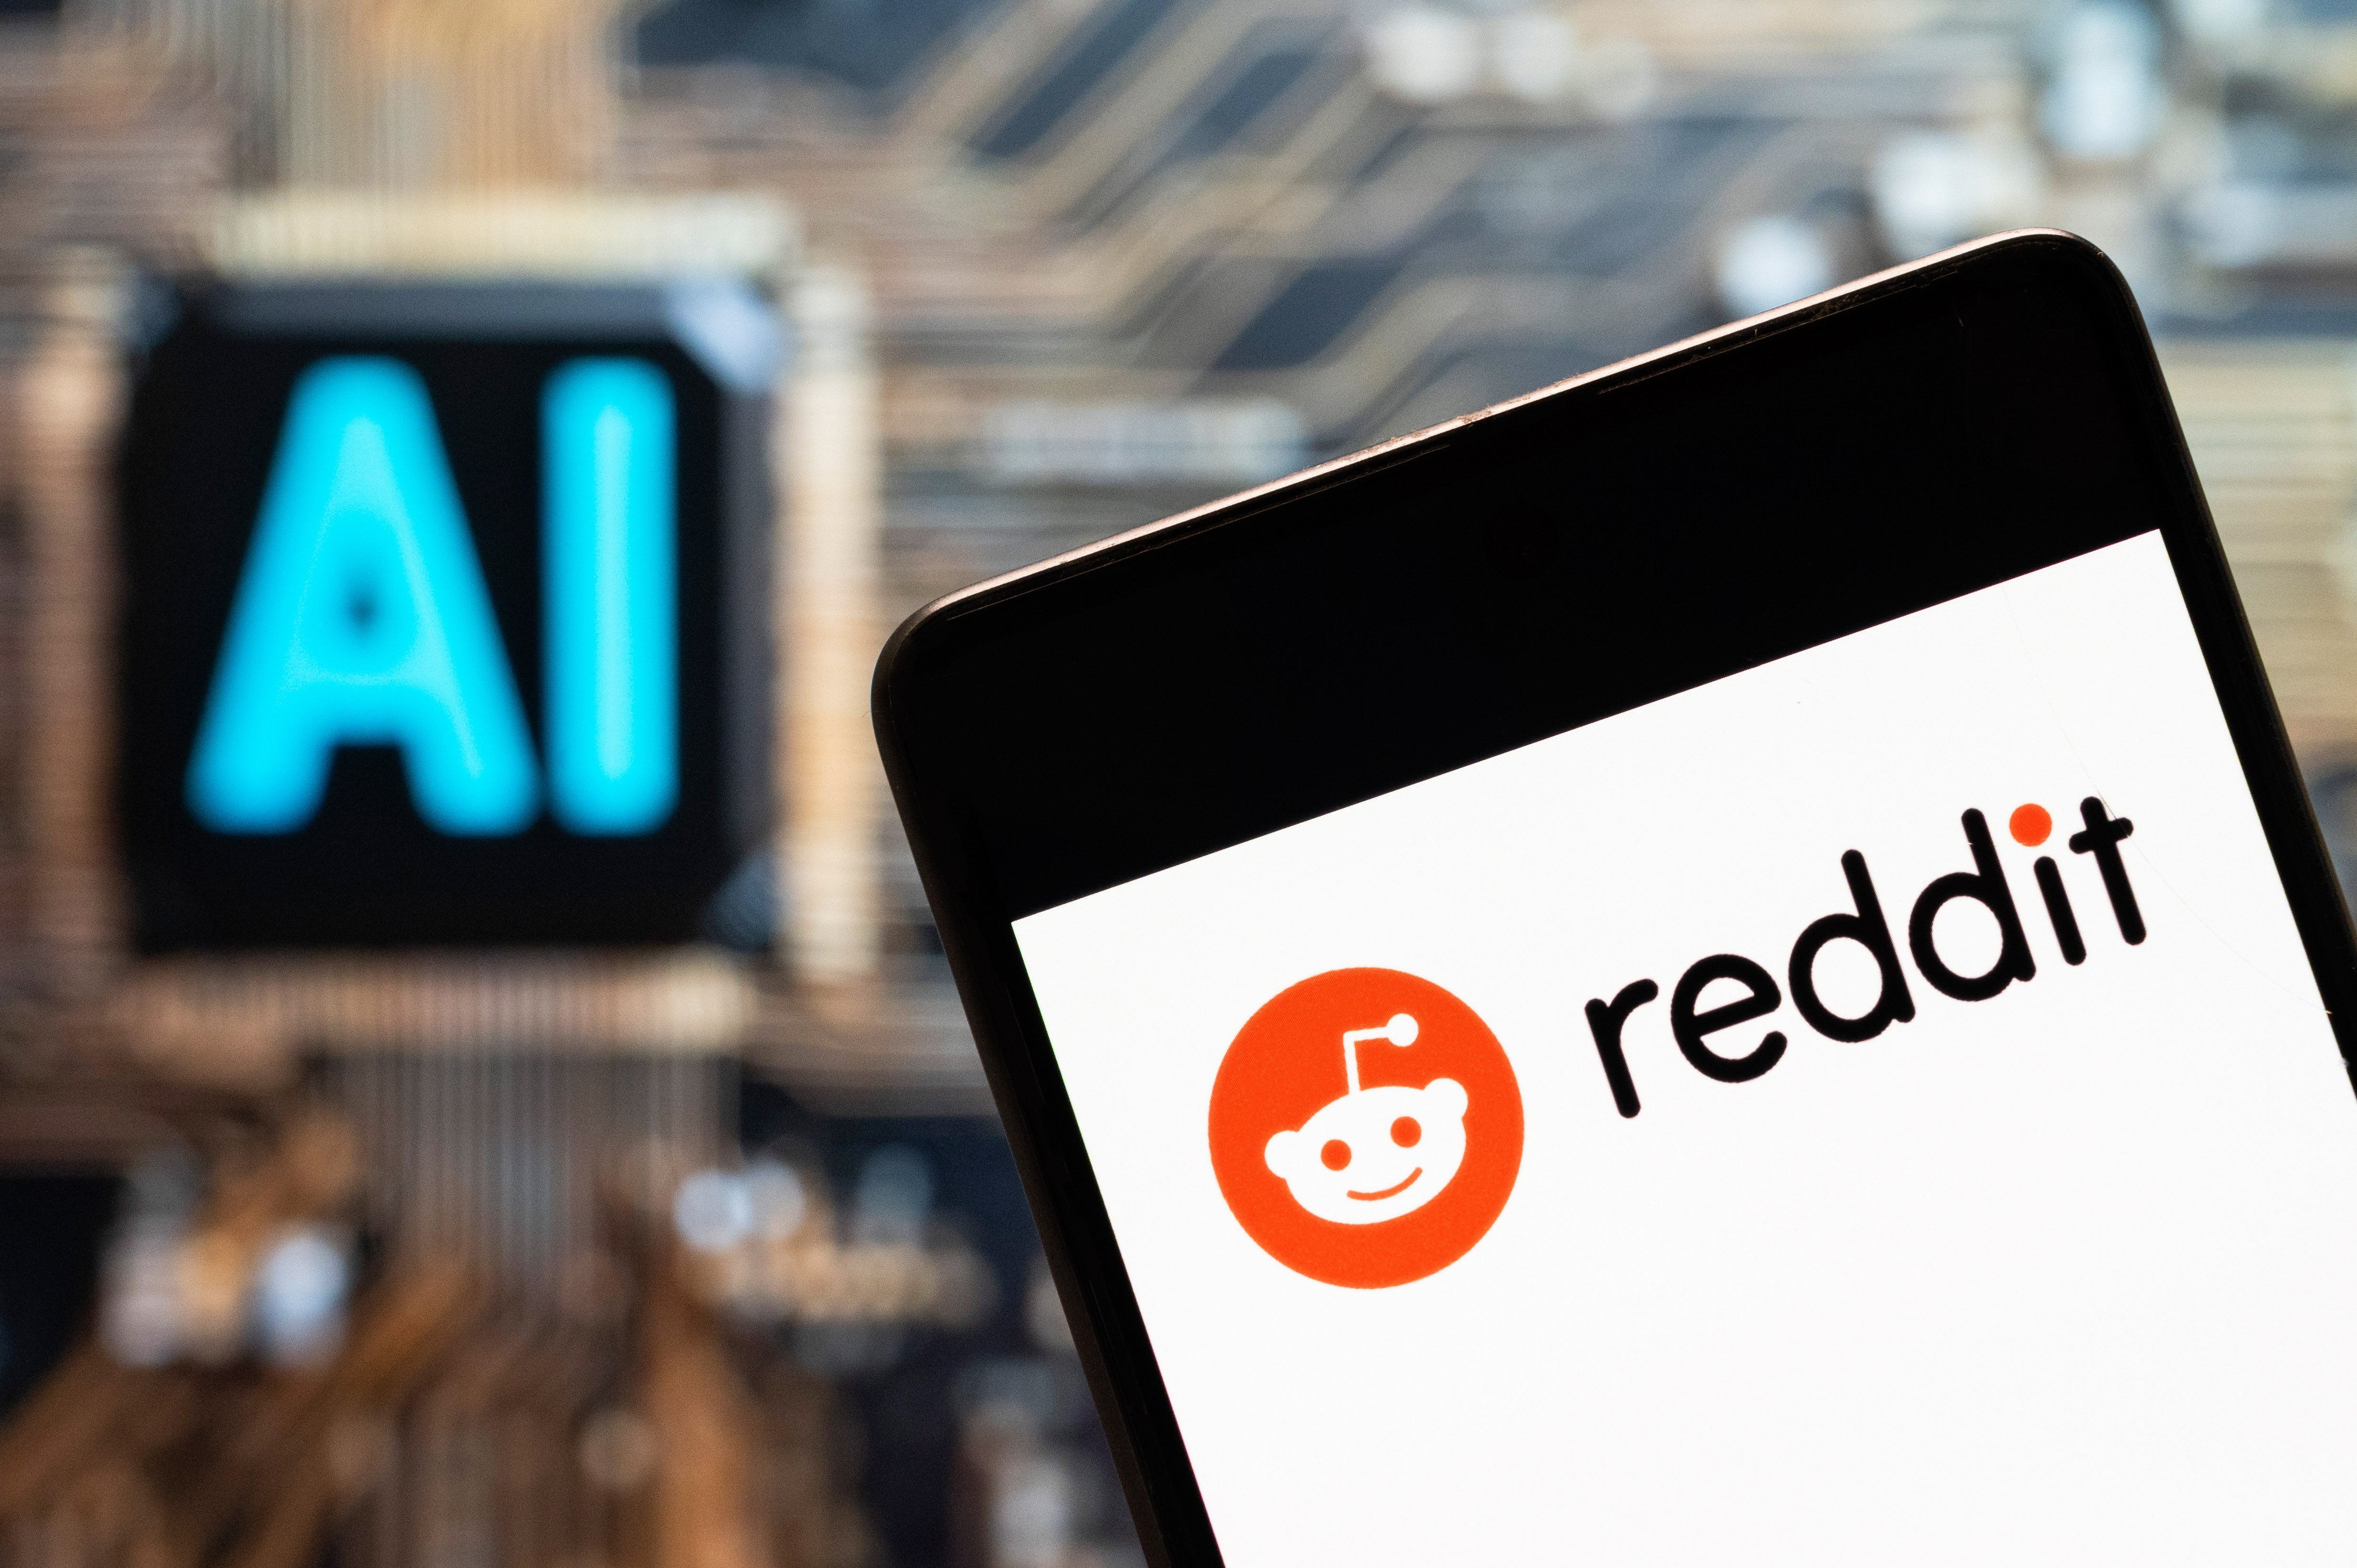 reddit-has-reportedly-signed-over-its-content-to-train-ai-mo-uxgw.jpg